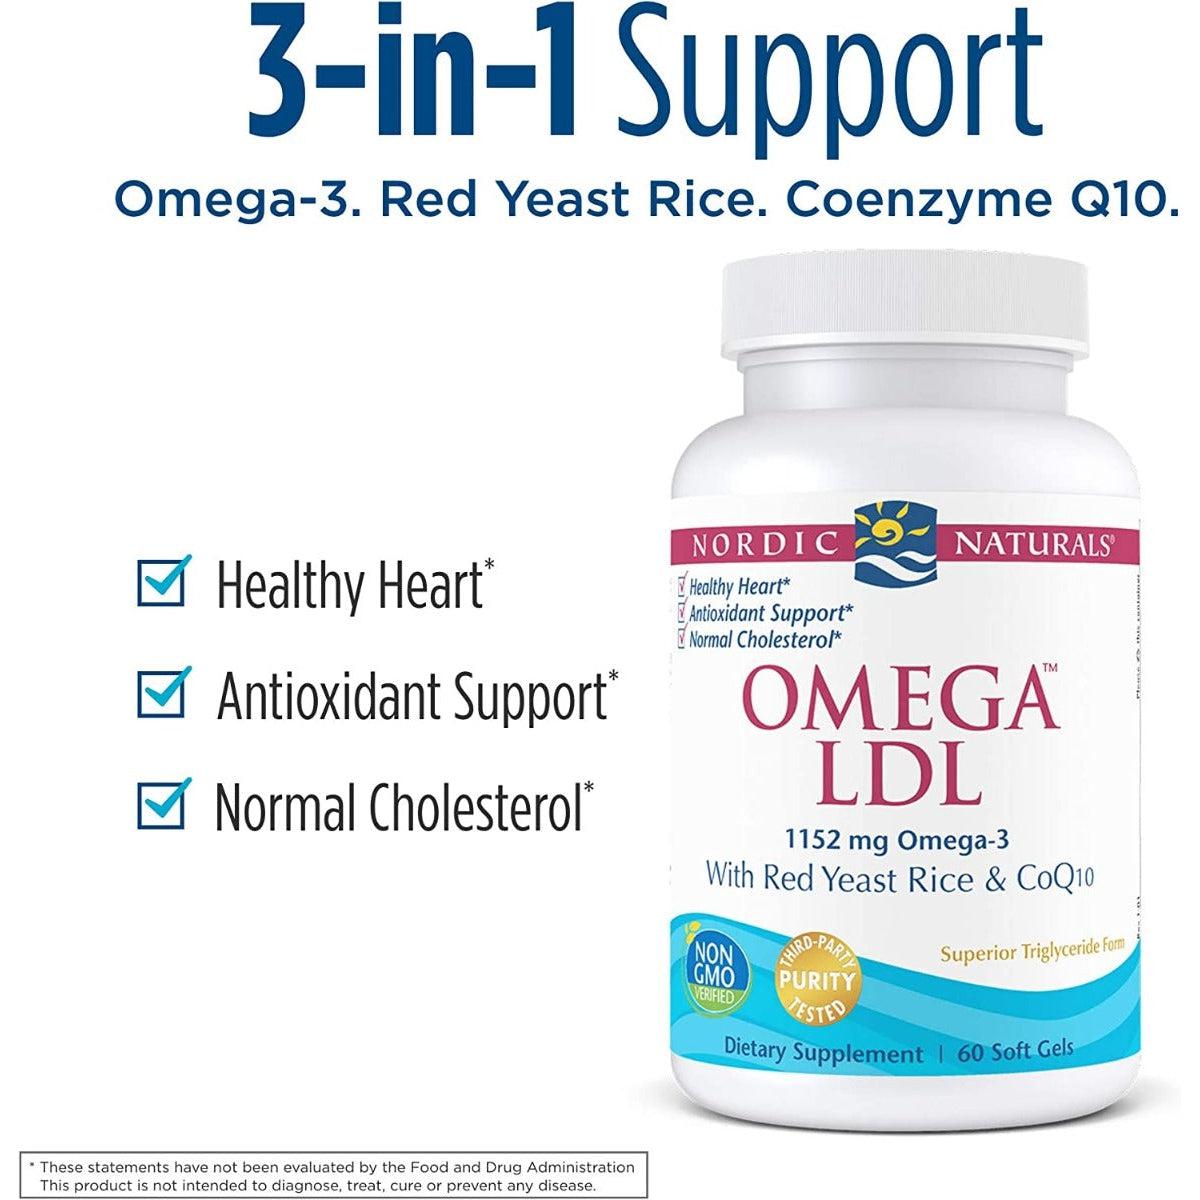 Nordic Naturals Omega LDL Lemon 1152mg Omega-3 Normal Cholesterol with Red Yeast Rice & CoQ10 60 Sof